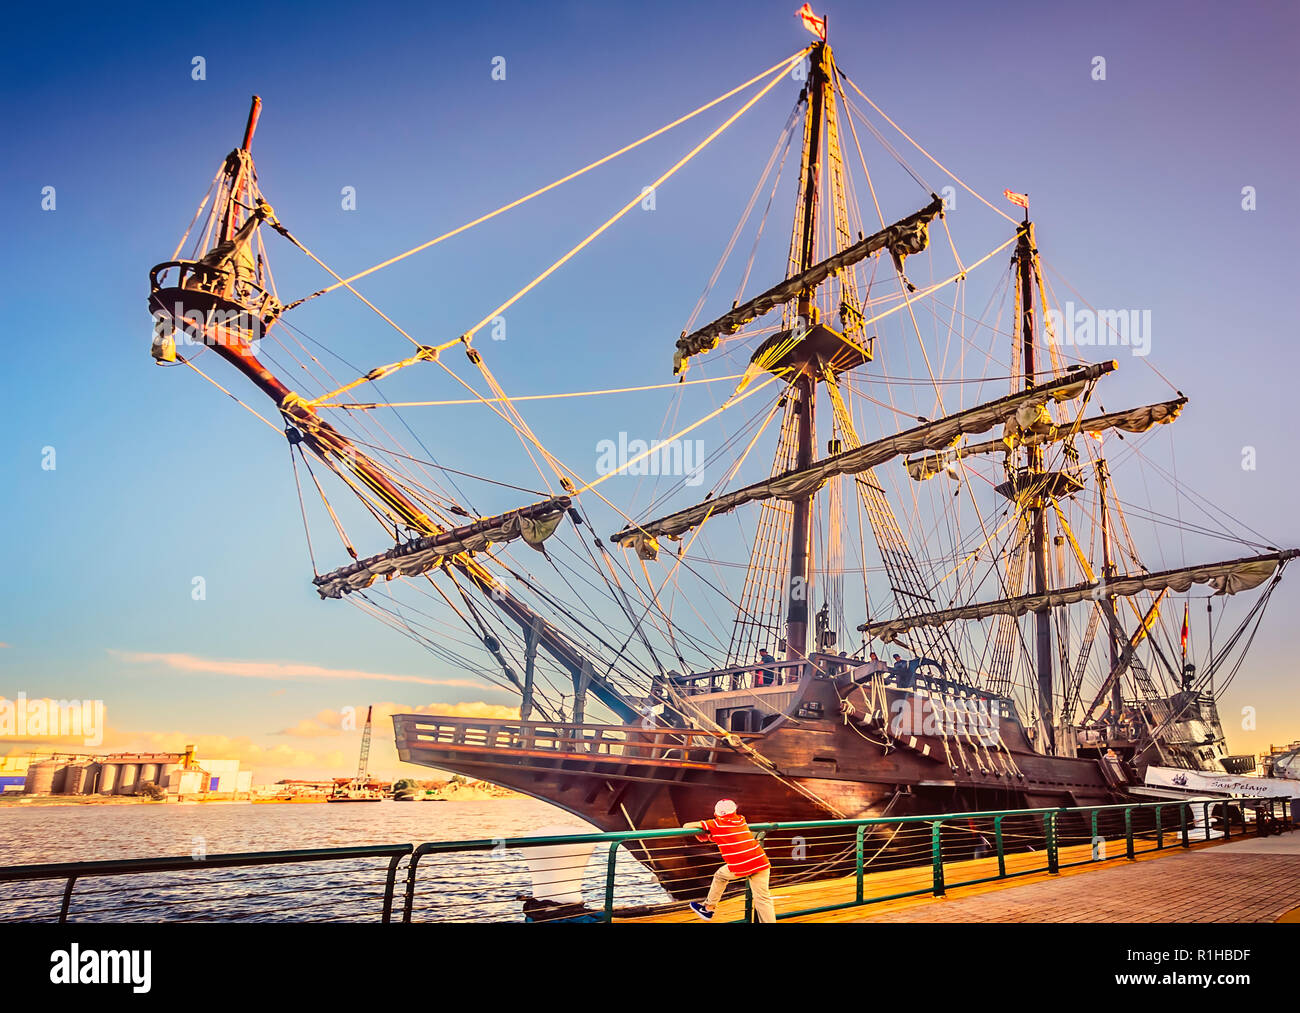 A young boy looks at El Galeon Andalucia, November 27, 2015, in Mobile, Alabama. Stock Photo